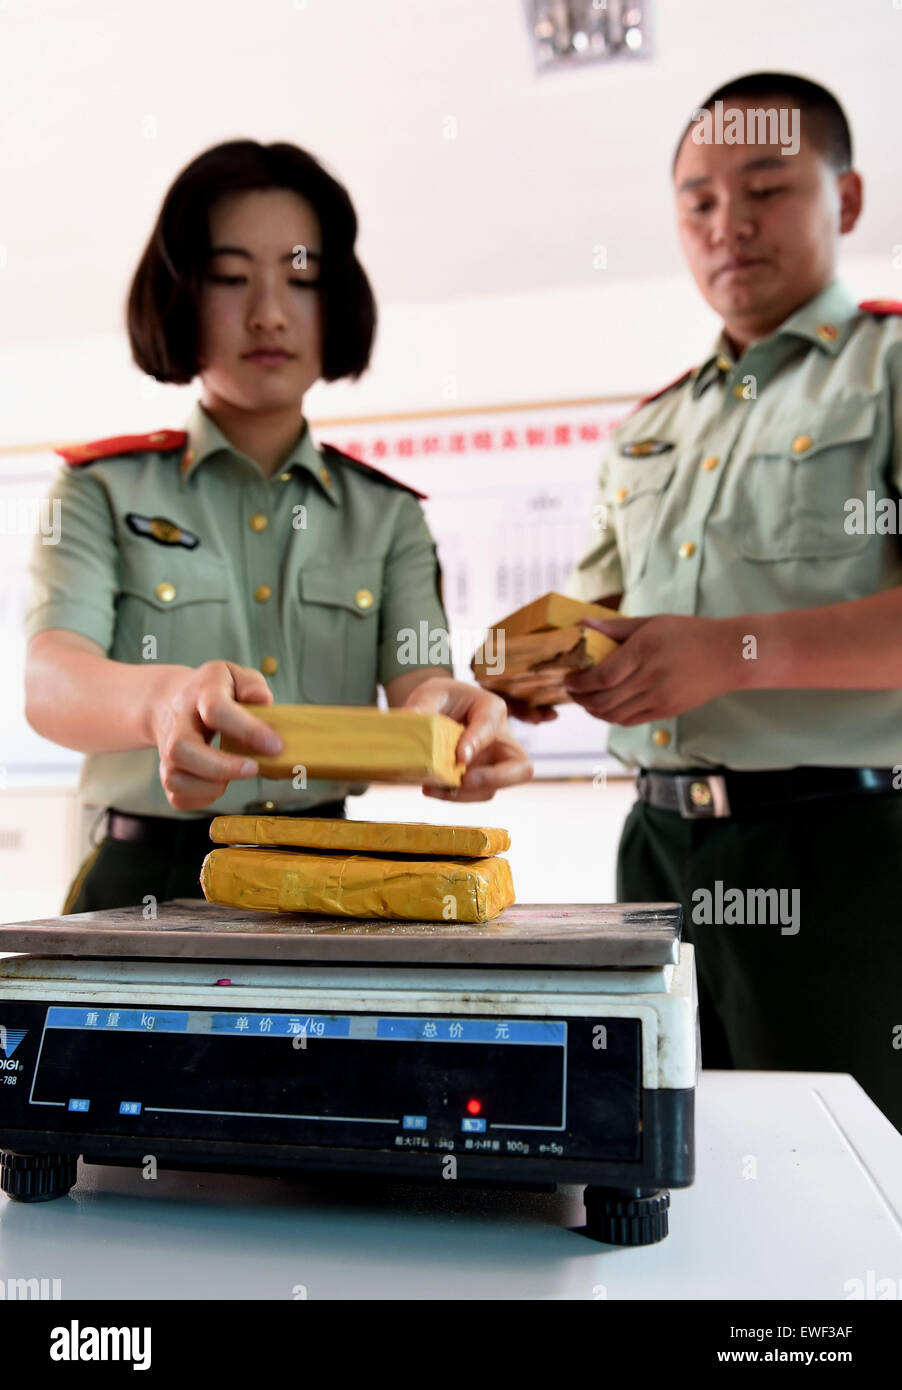 (150625) -- DEHONG, June 25, 2015 (Xinhua) -- Zhang Liu (L) and her comrade prepare to weigh drugs they captured at border checkpoint of Mukang in Dehong Dai-Jingpo Autonomous Prefecture, southwest China's Yunnan Province, June 24, 2015. Born in 1995, Zhang Liu became an anti-drug soldier in border checkpoint of Mukang in 2013. Grown up in an affluent family in central China's Hunan Province, Zhang said that being a soldier had always been her dream, which drove her to join the army after graduating from high school. Being a front line anti-drug force, the border checkpoint of Mukang has capt Stock Photo